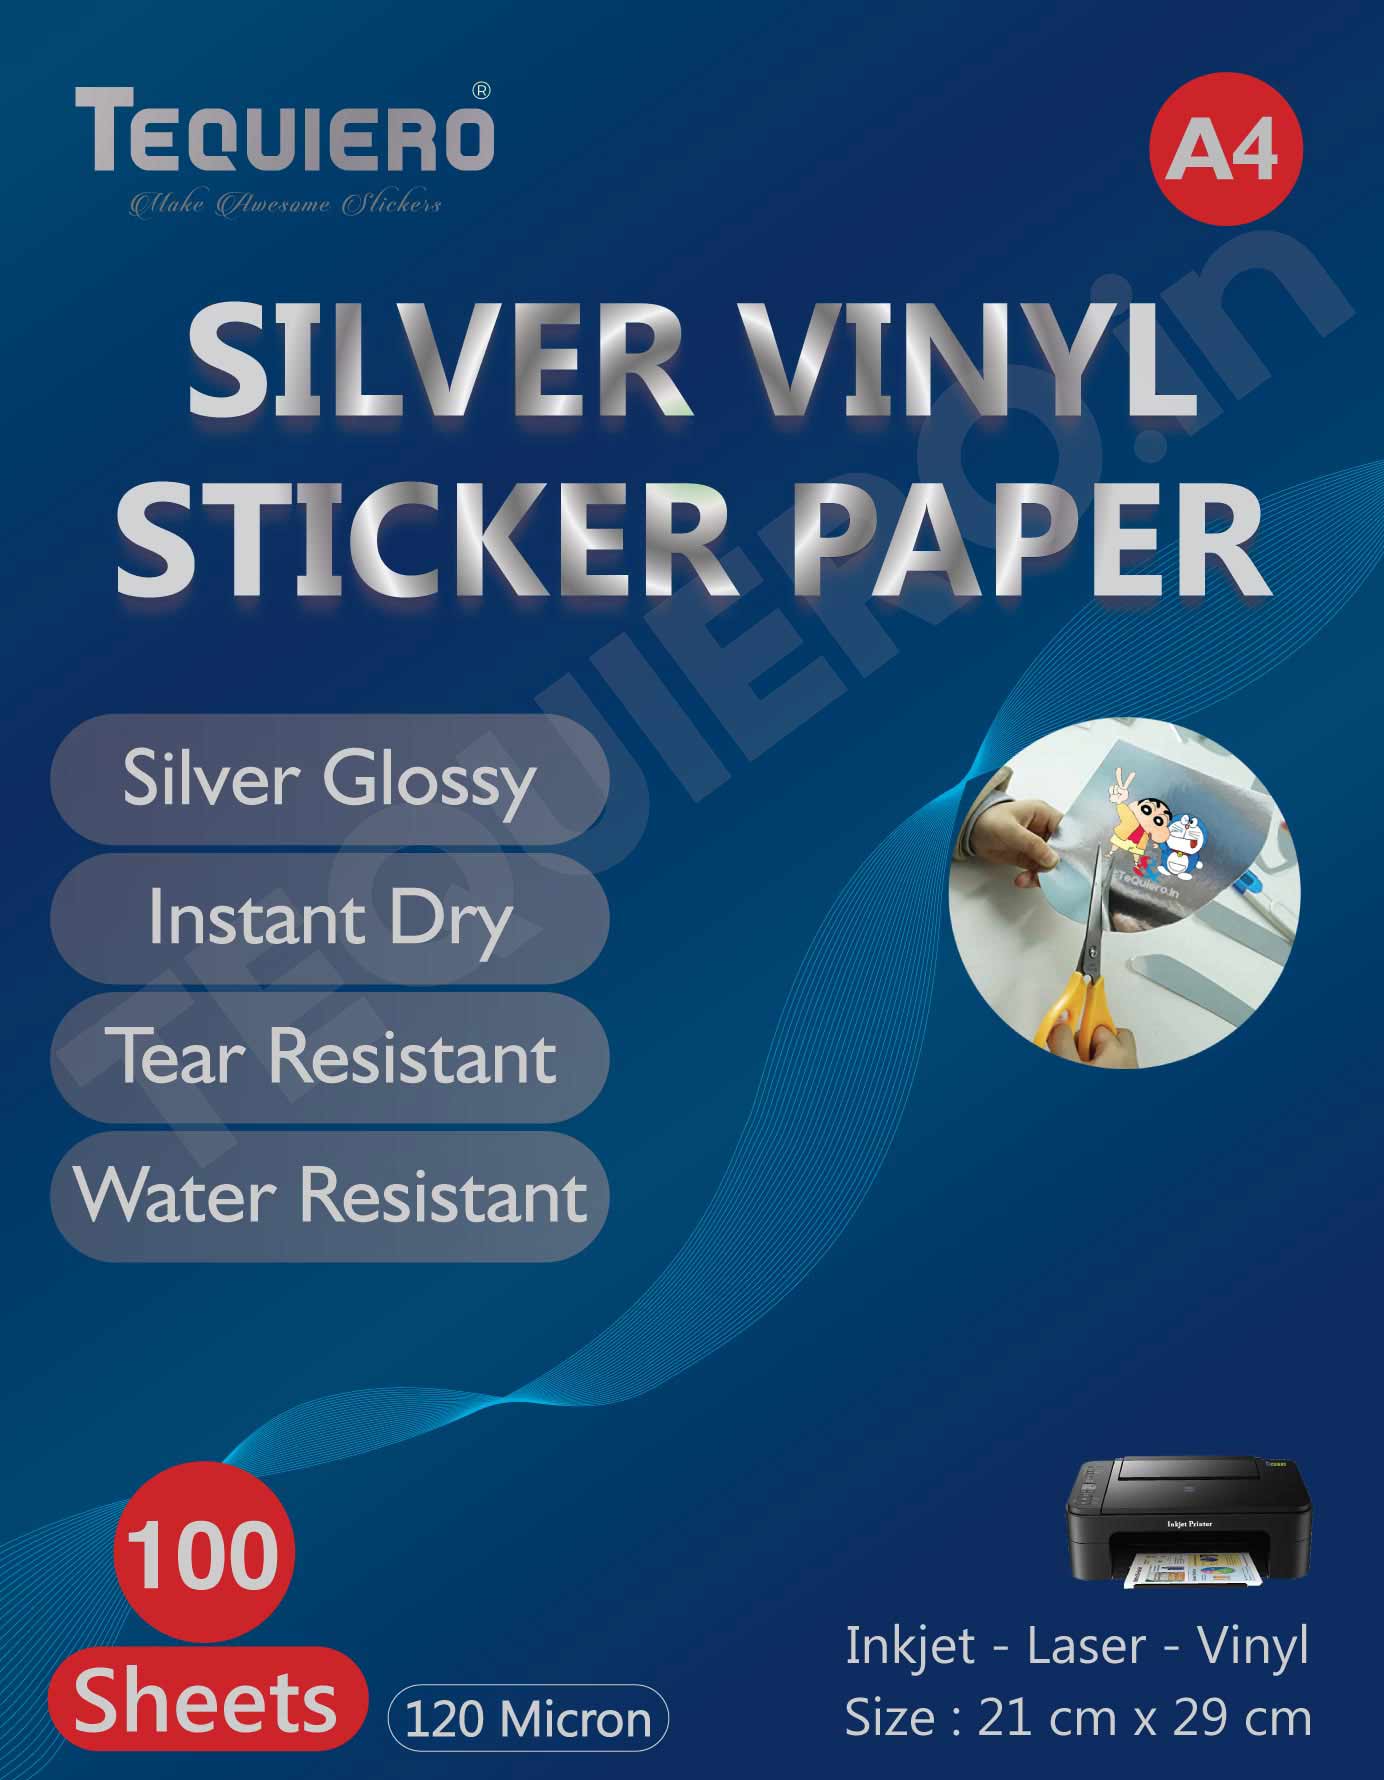 rintable Silver Vinyl Sticker Papers for inkjet and laser printers - 100 Sheets Pack